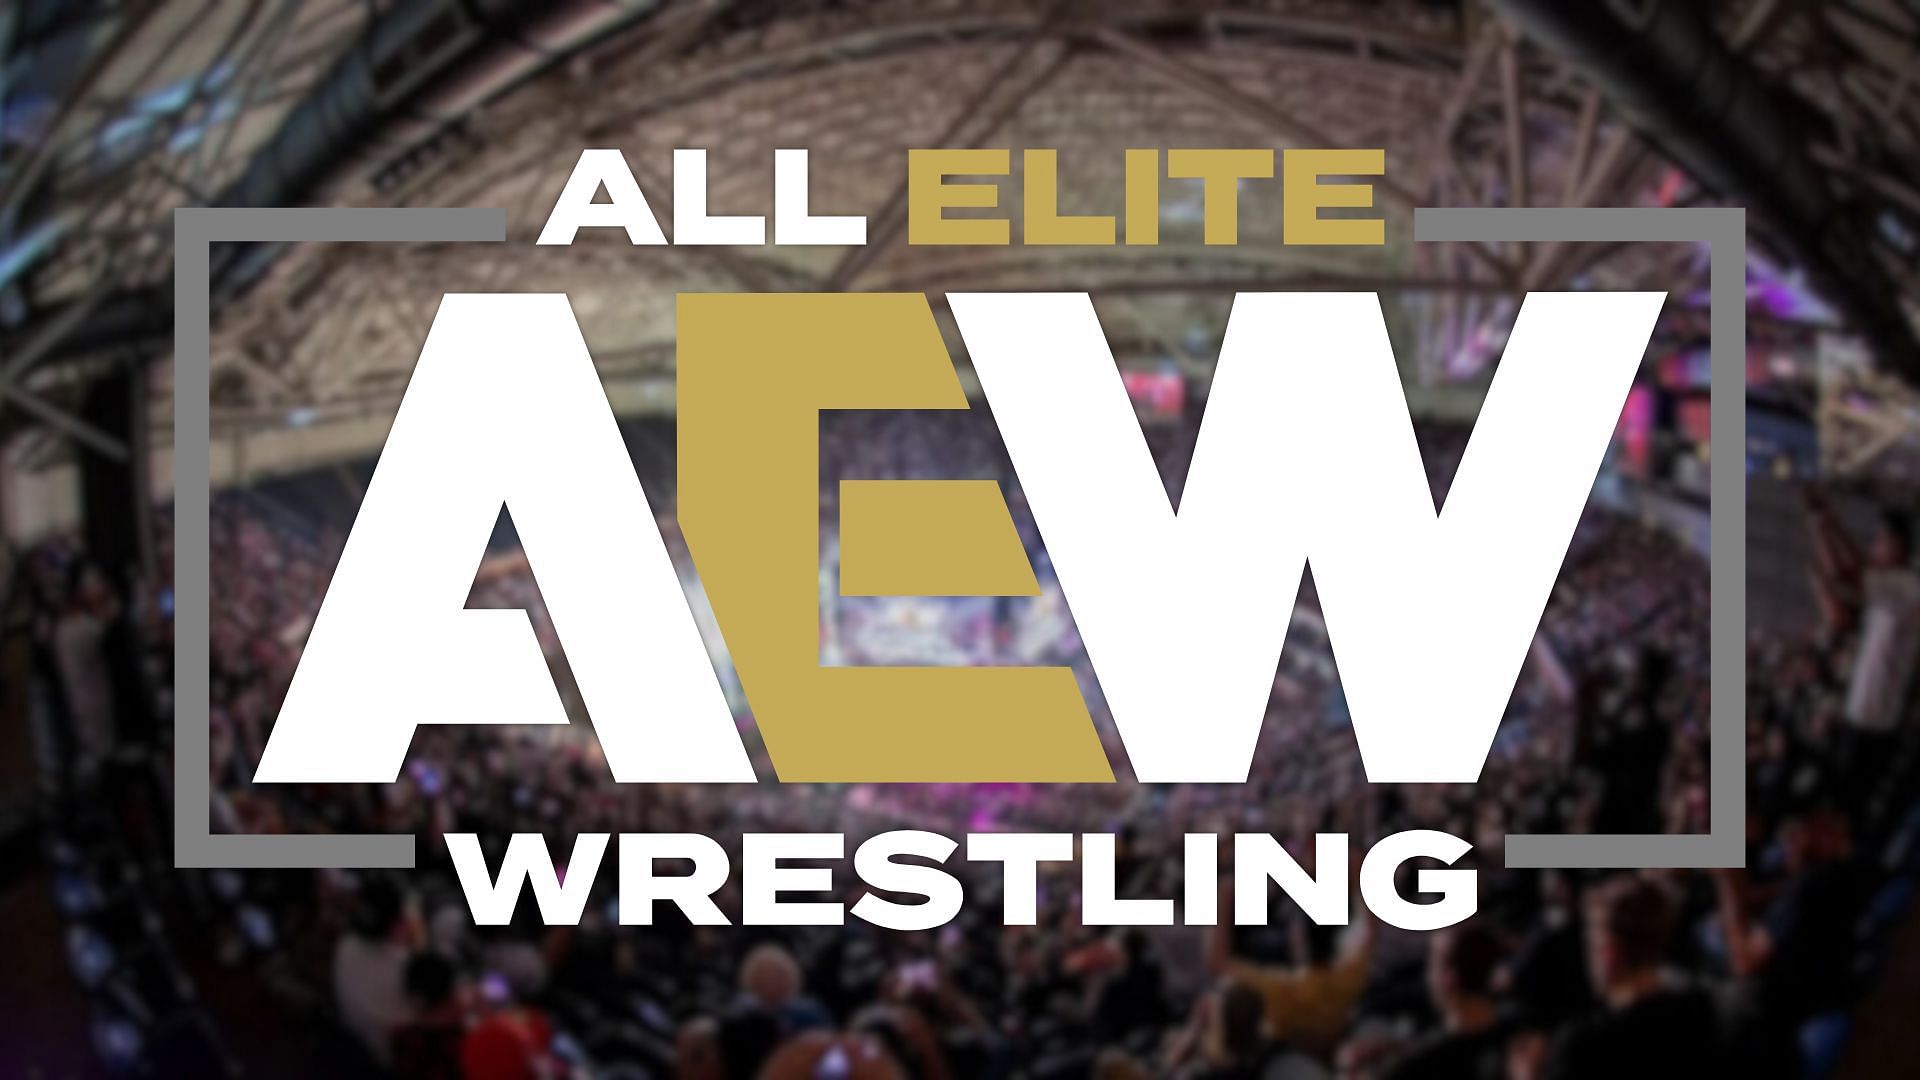 Which current champion could be making their AEW debut this year?